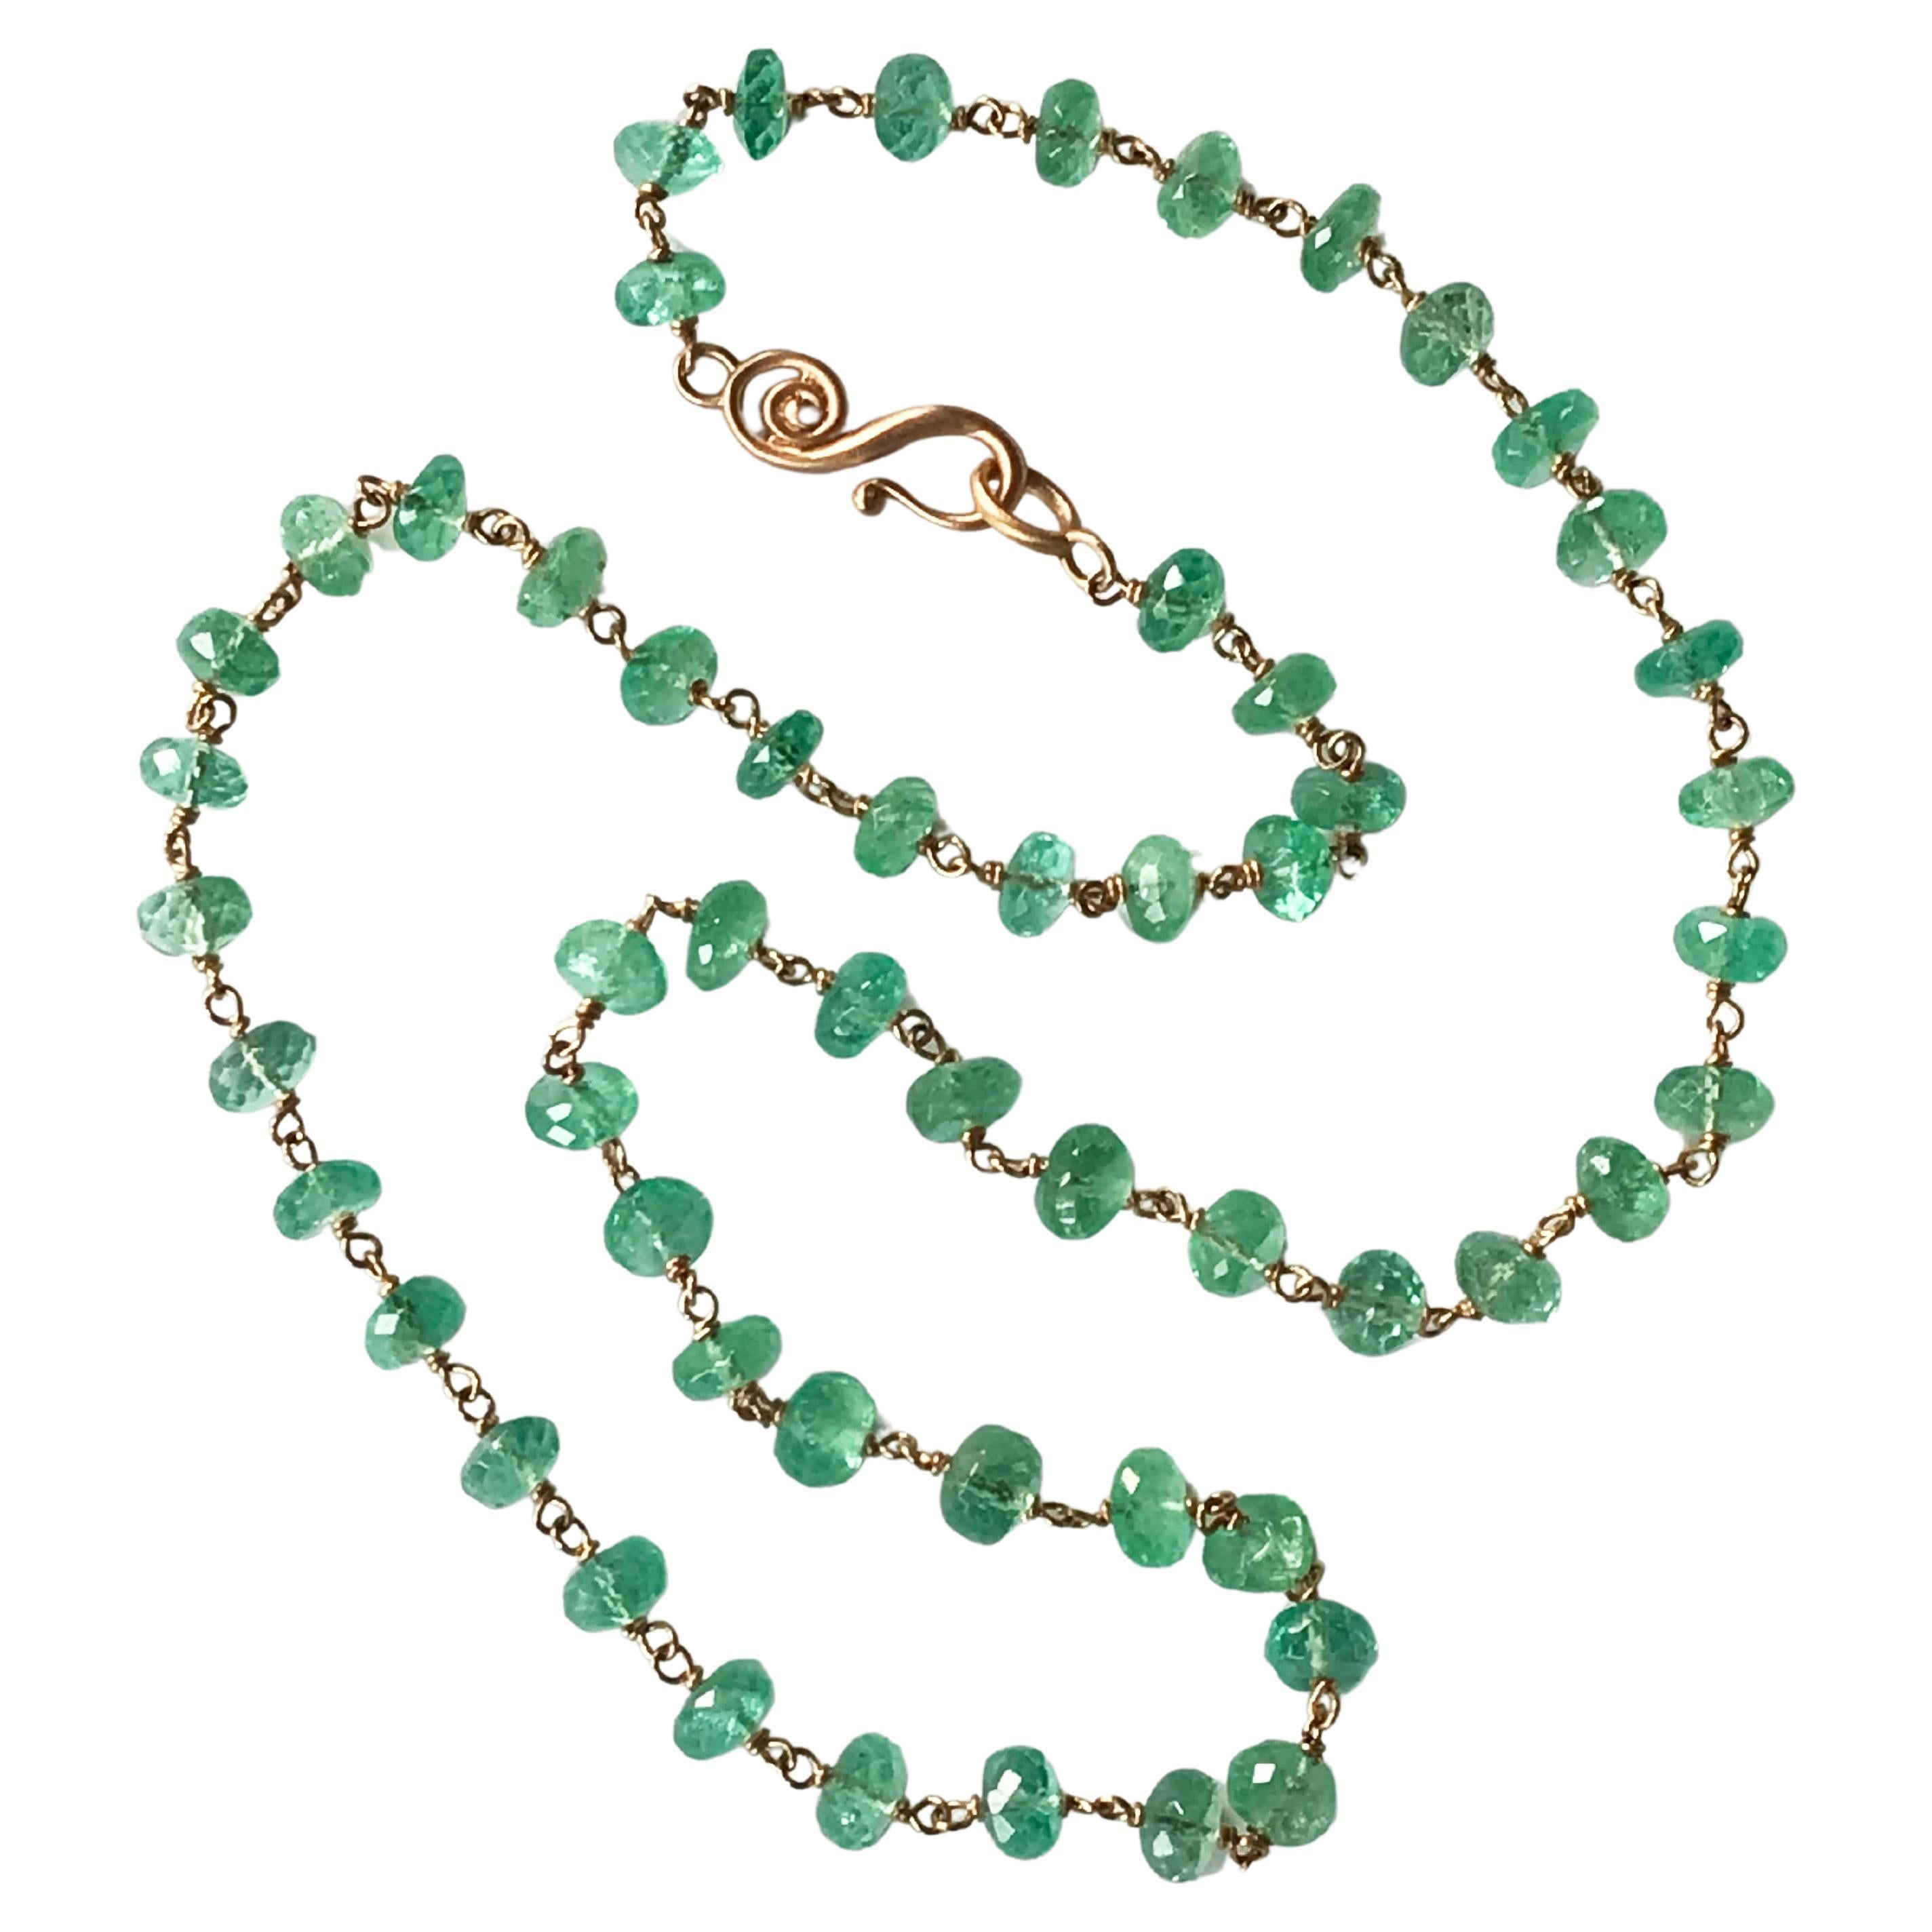 Dalben Emerald Beads Rose Gold Necklace